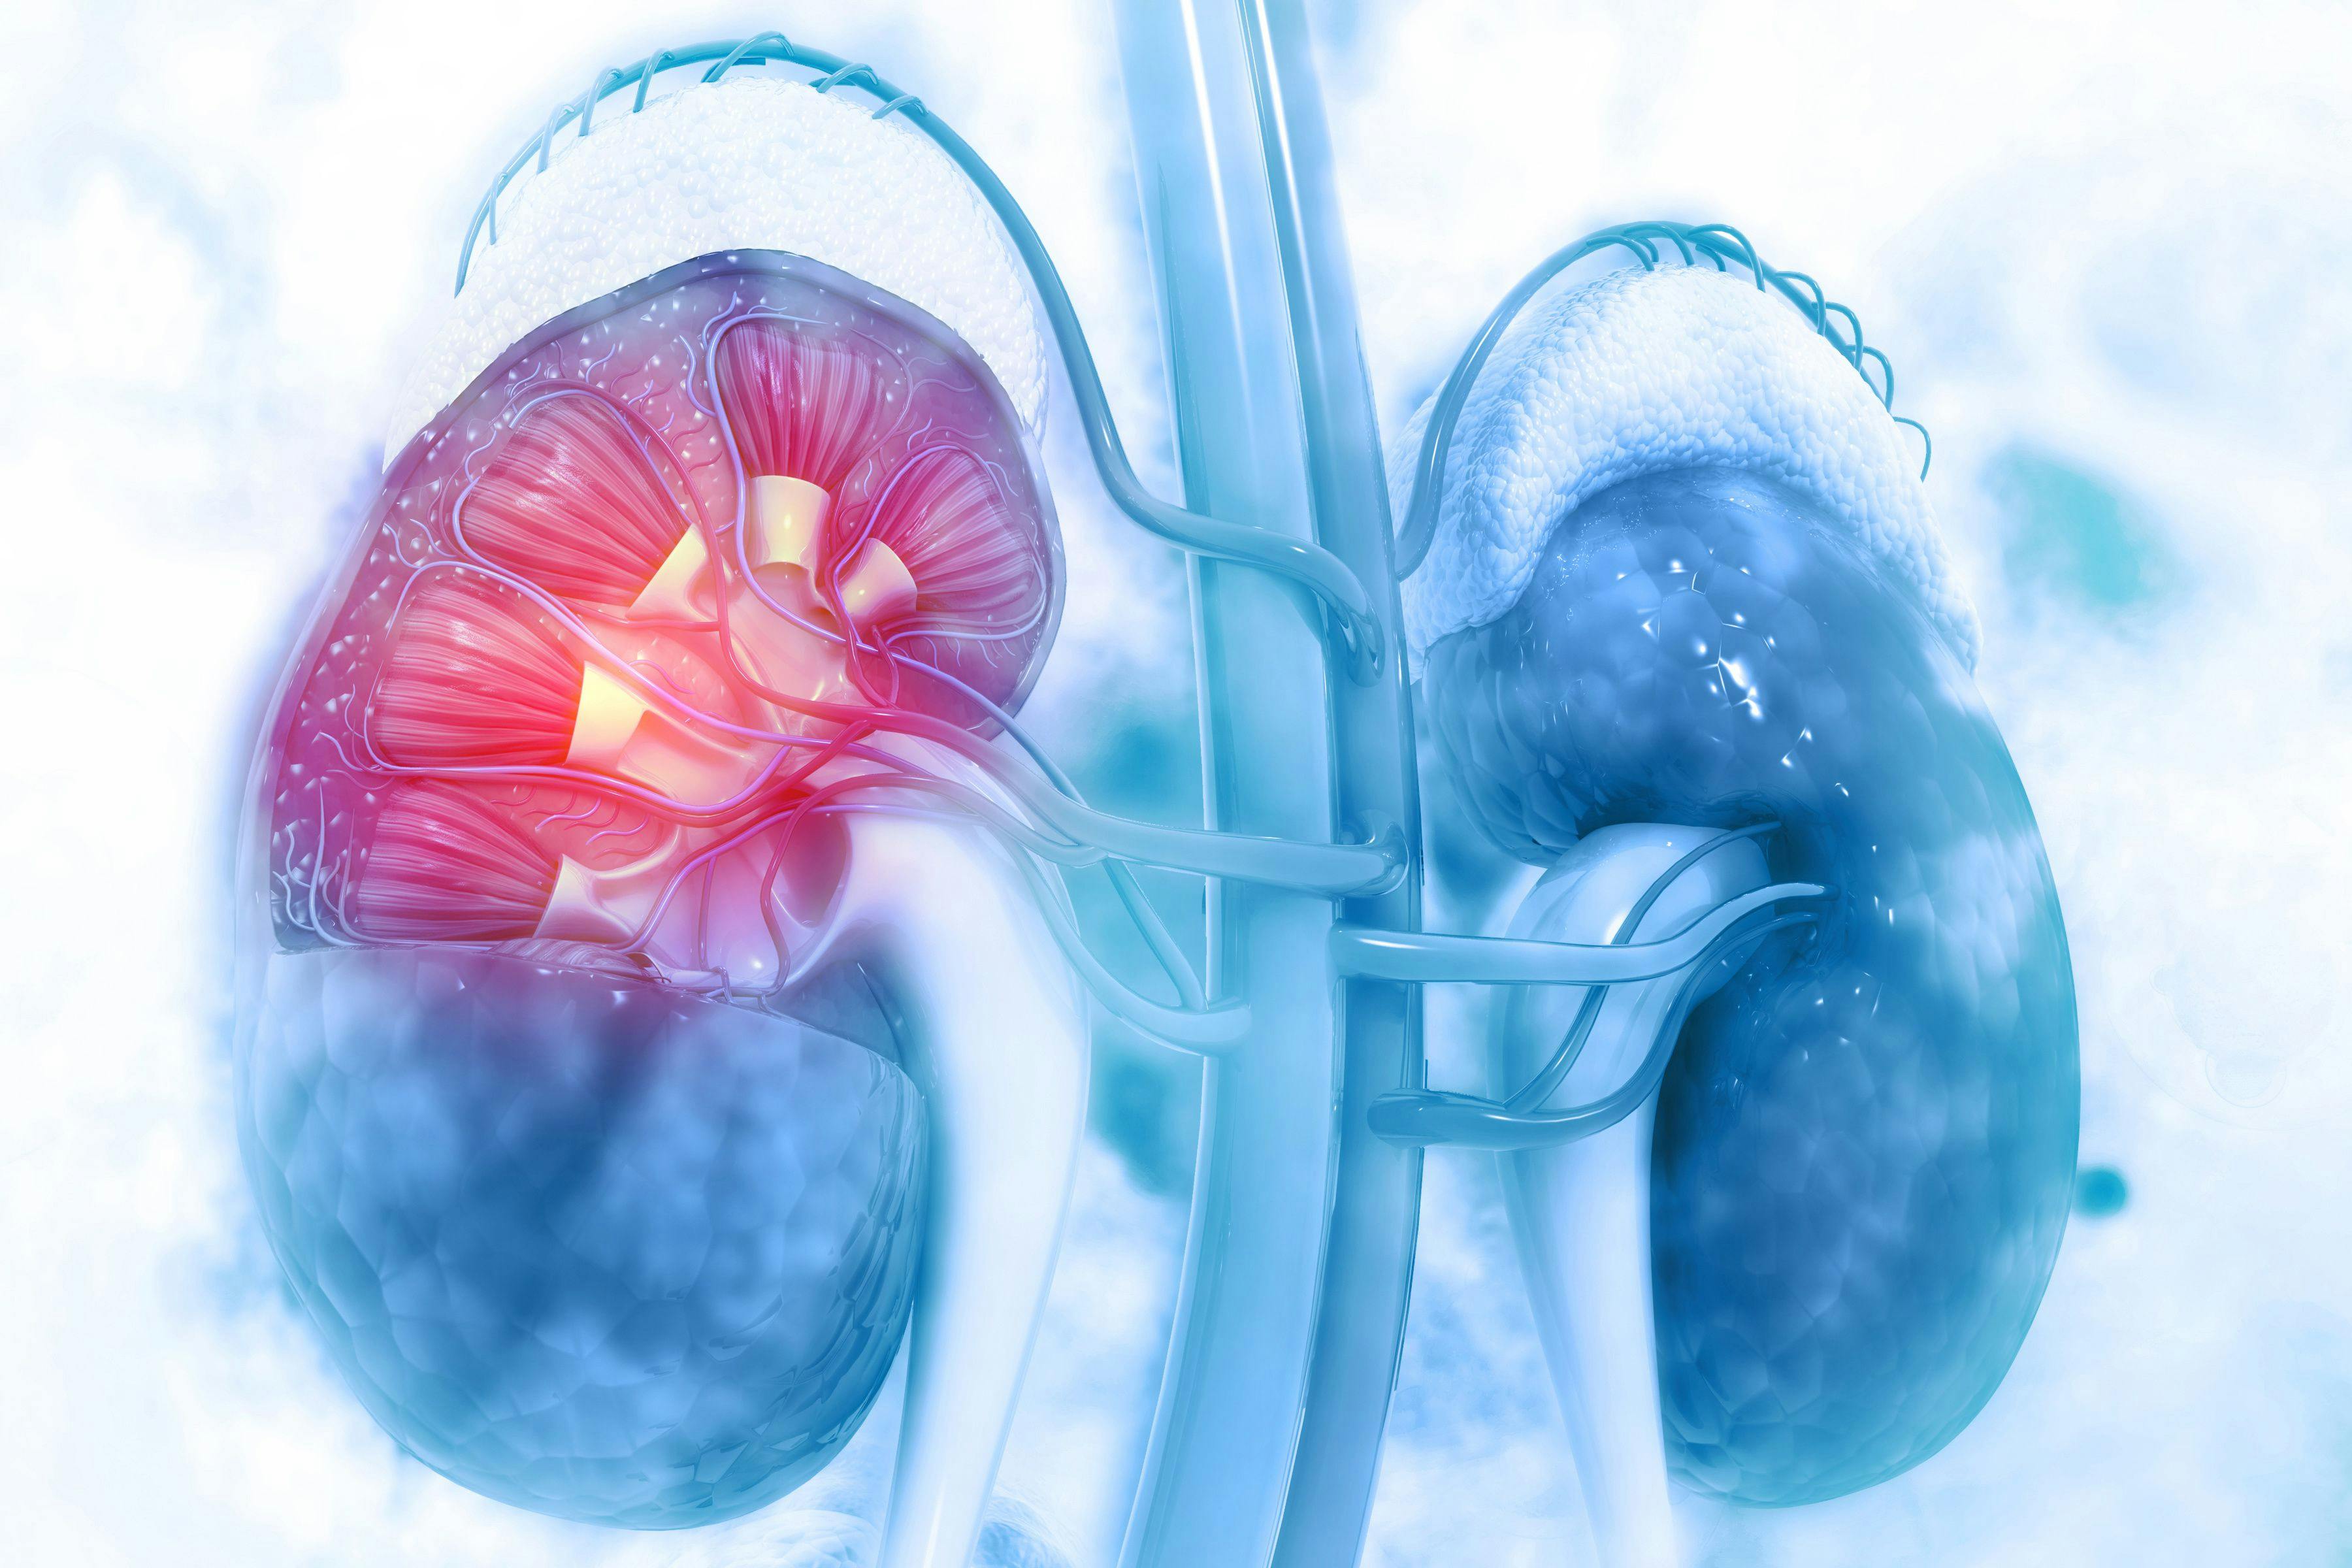 Cabozantinib Associated With Higher Rates of Certain AEs in Advanced Kidney Cancer